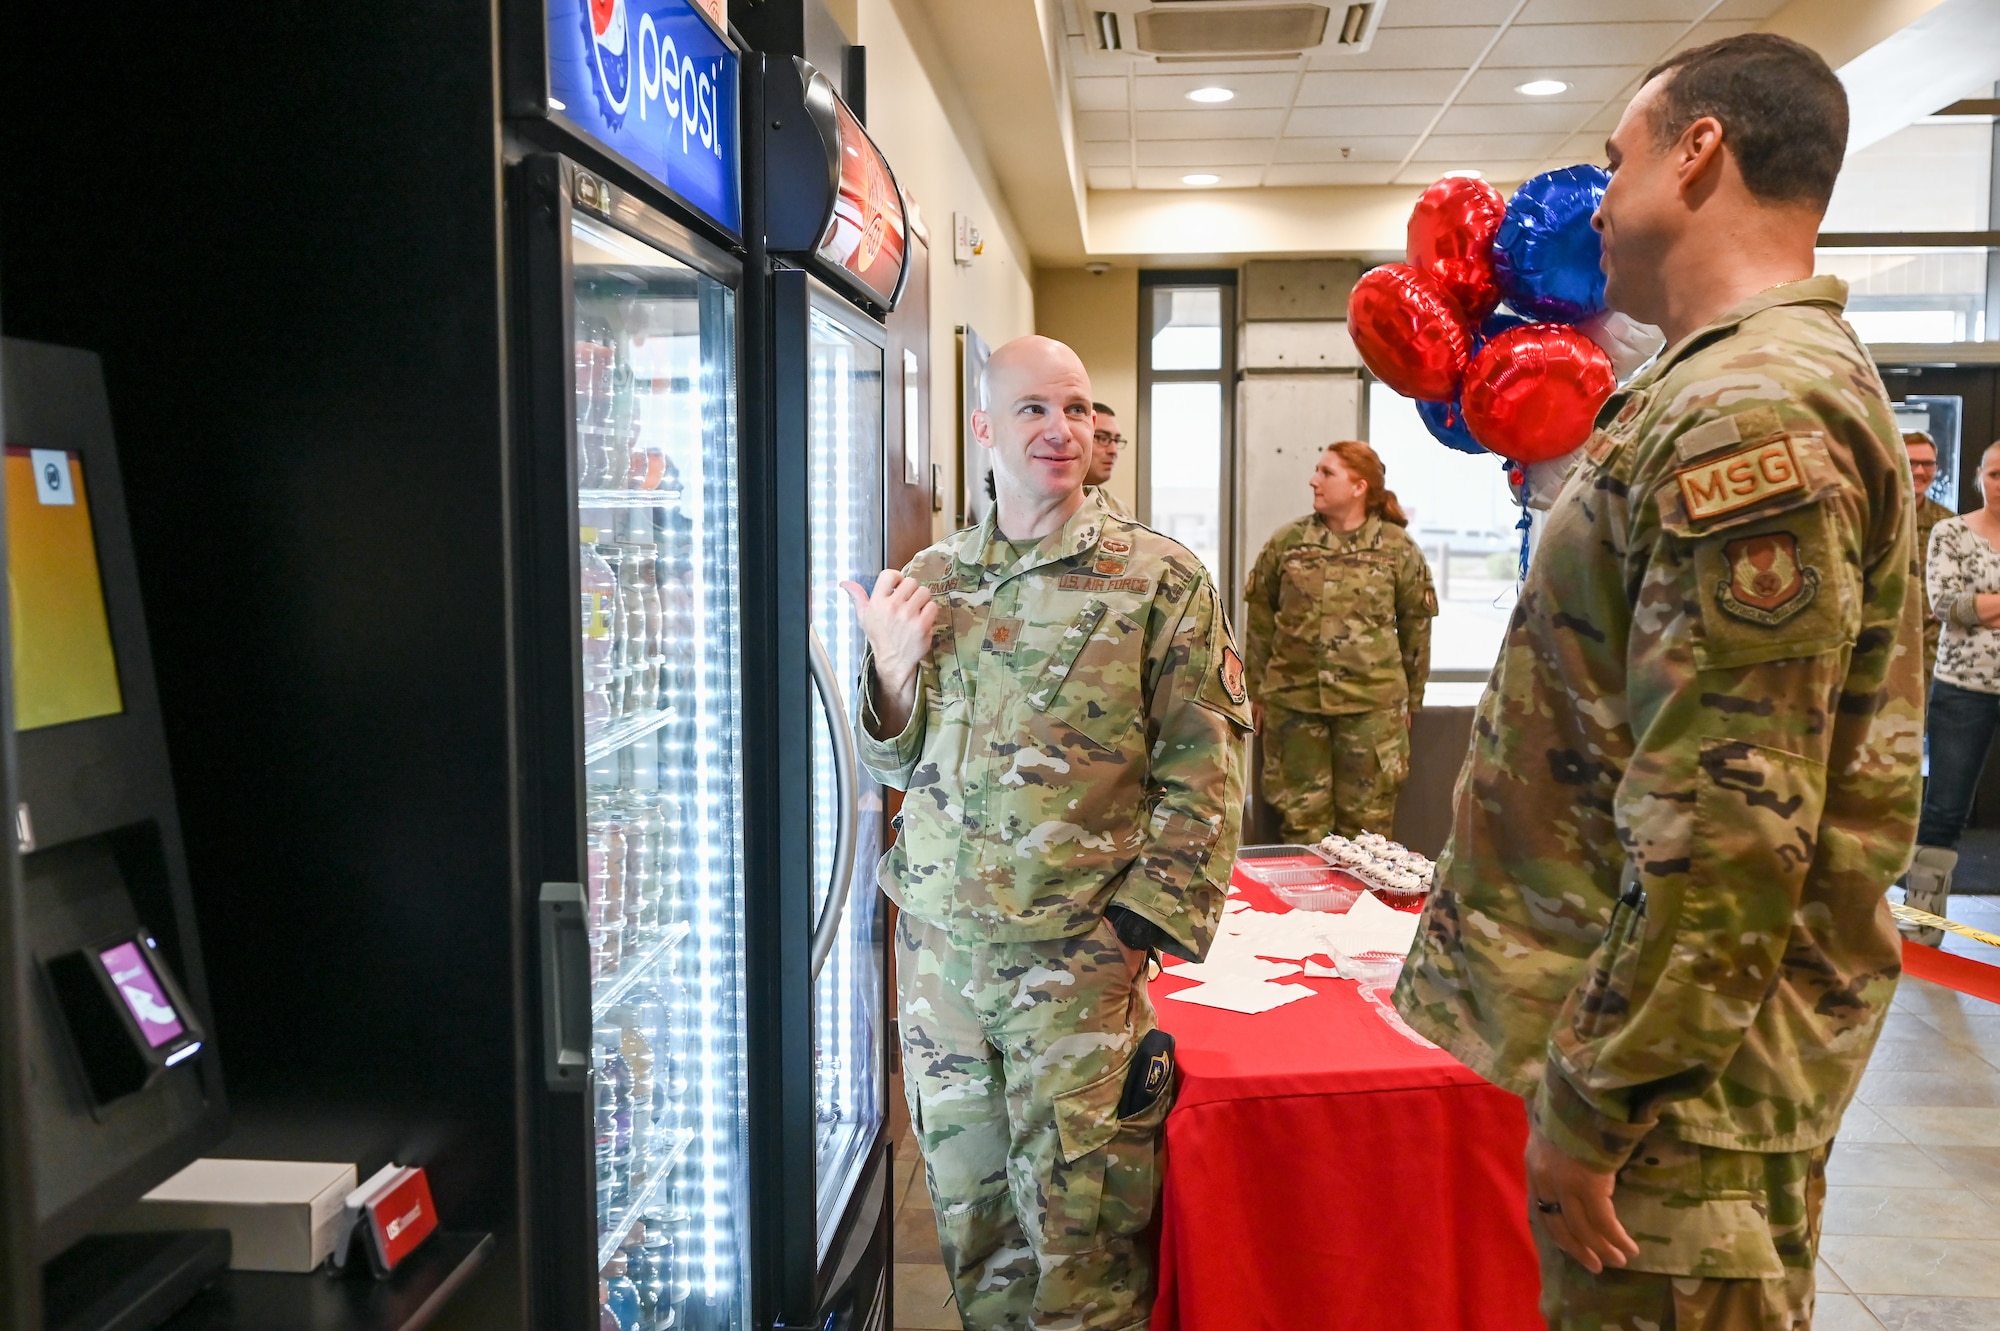 Maj. Paul Dinkins, 75th Security Forces Squadron commander, and Col. Khalim Taha, 75th Mission Support Group commander, look over the items in the new micro marke